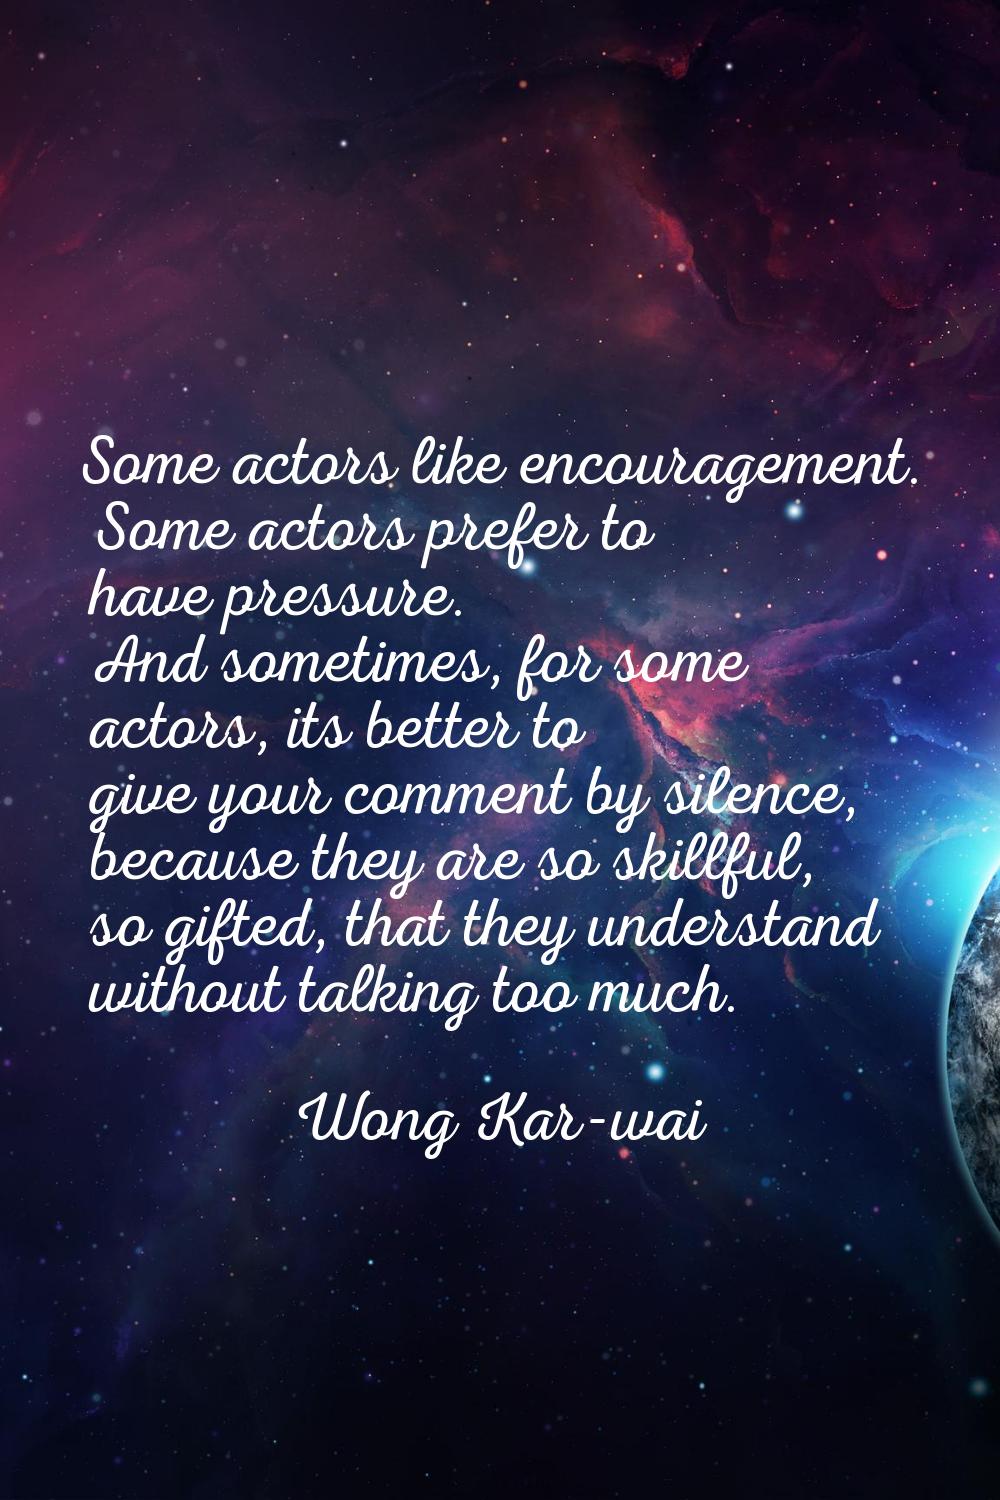 Some actors like encouragement. Some actors prefer to have pressure. And sometimes, for some actors